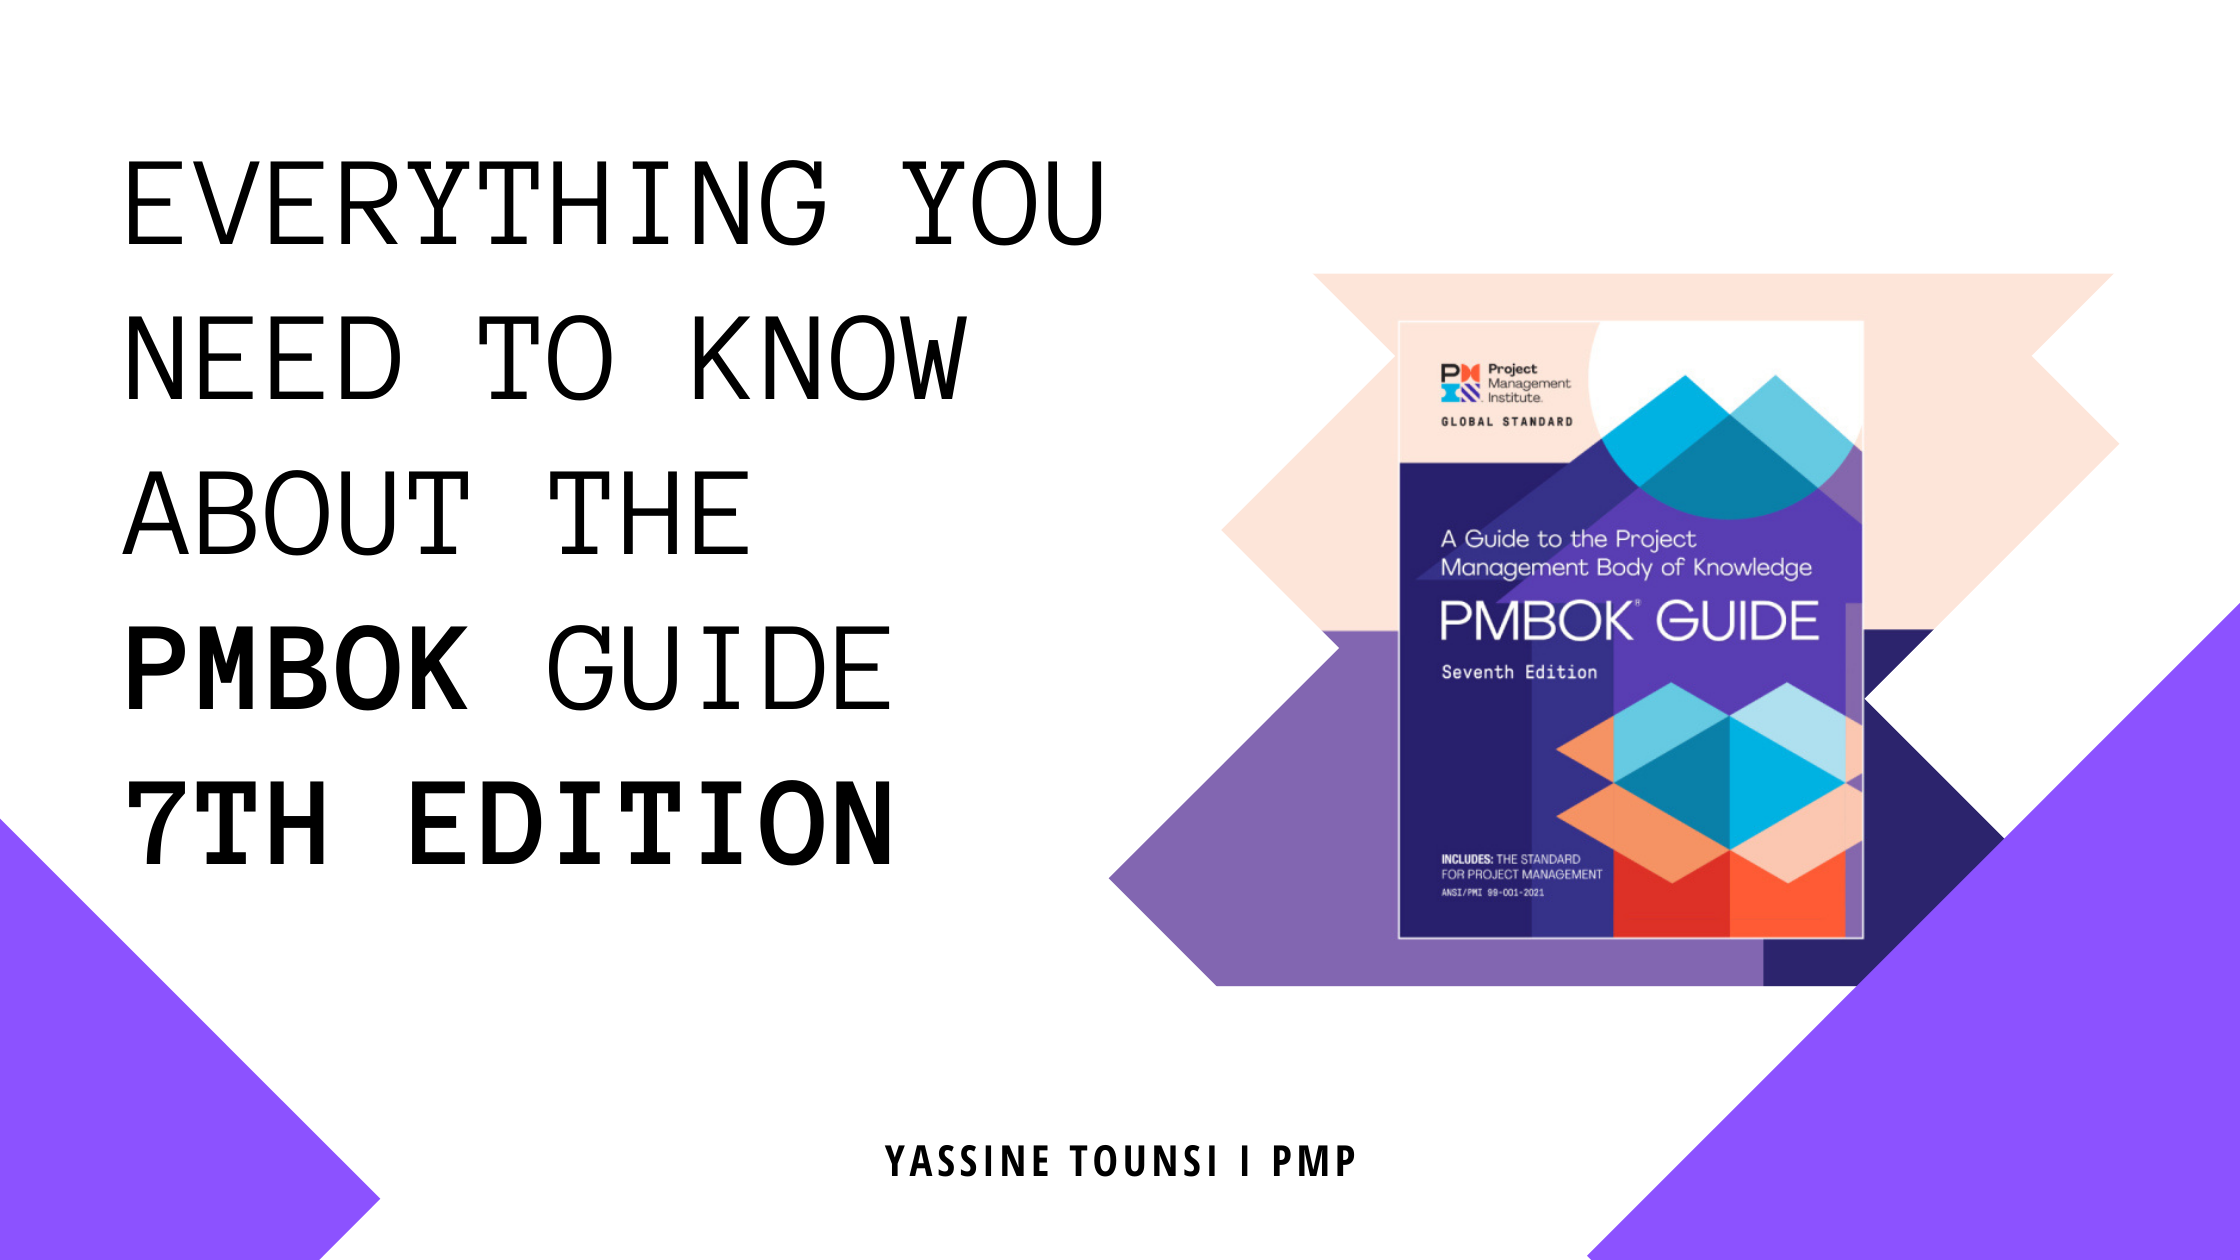 Everything you need to know about the PMBOK Guide 7th edition